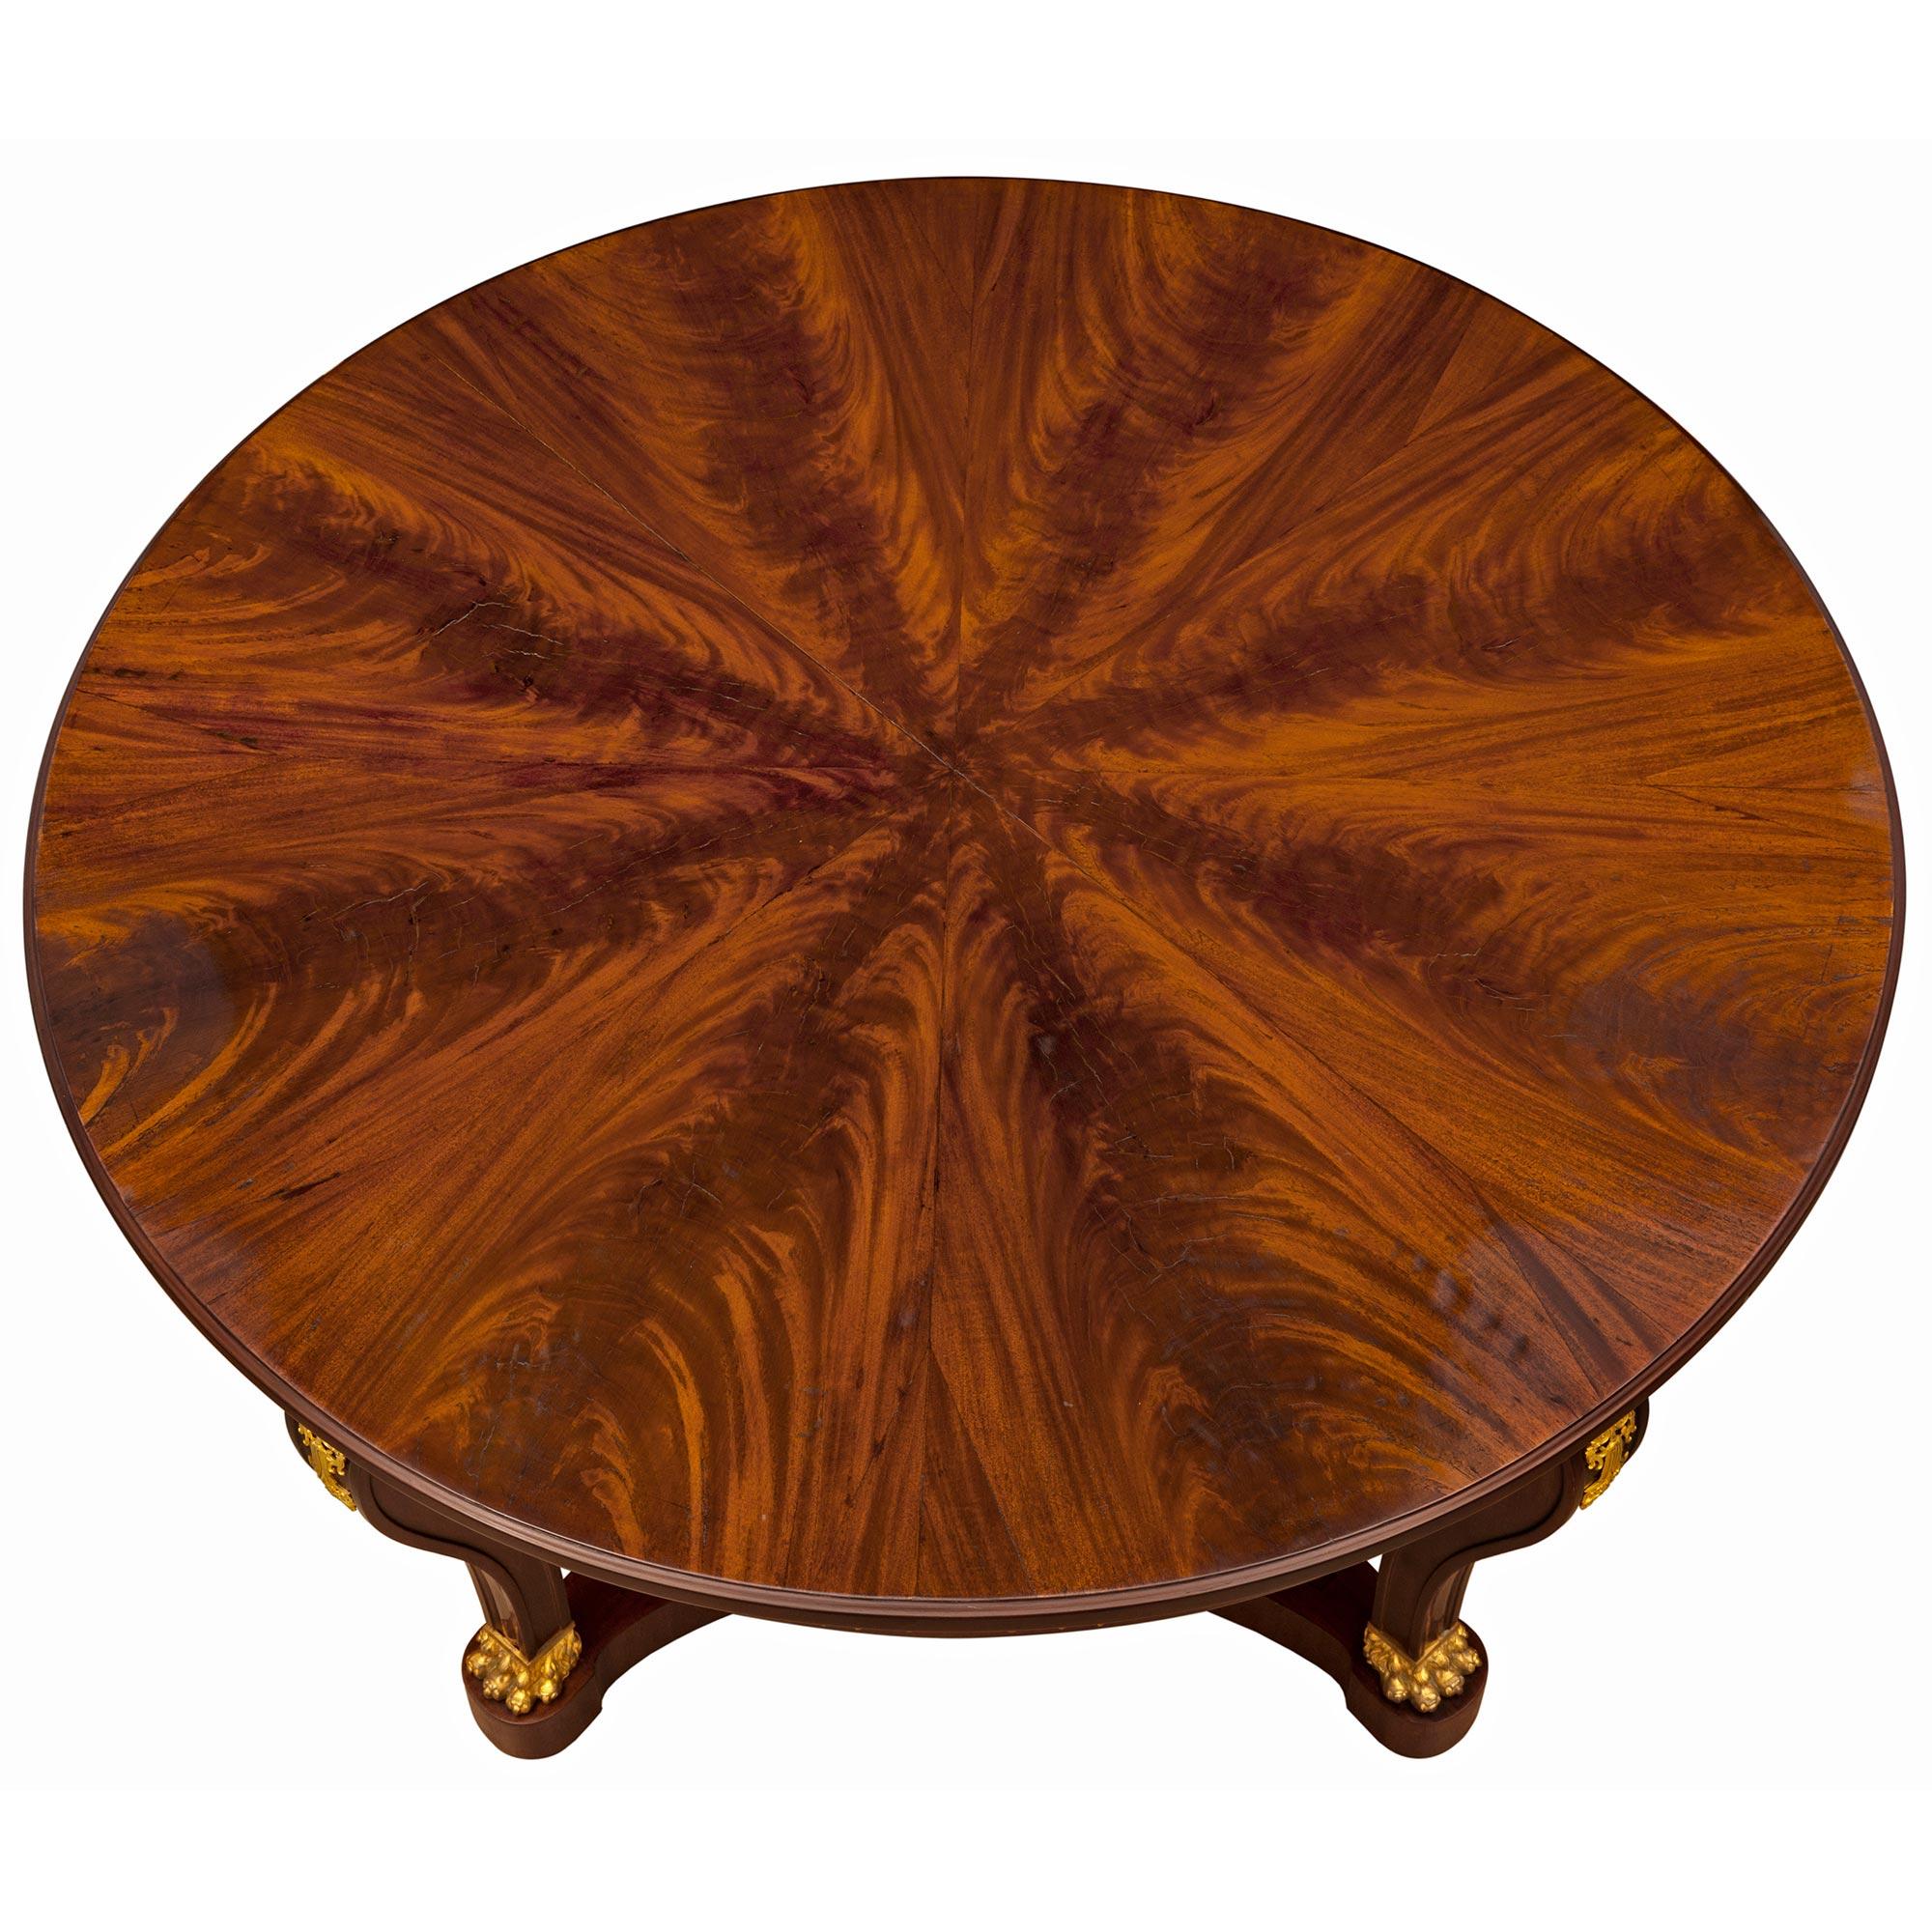 An impressive and most decorative French 19th century Empire St. mahogany and ormolu center table. The circular table is raised by fine bun feet below elegant scrolled legs with handsome ormolu paw feet, recessed carved pierced panels, and foliate